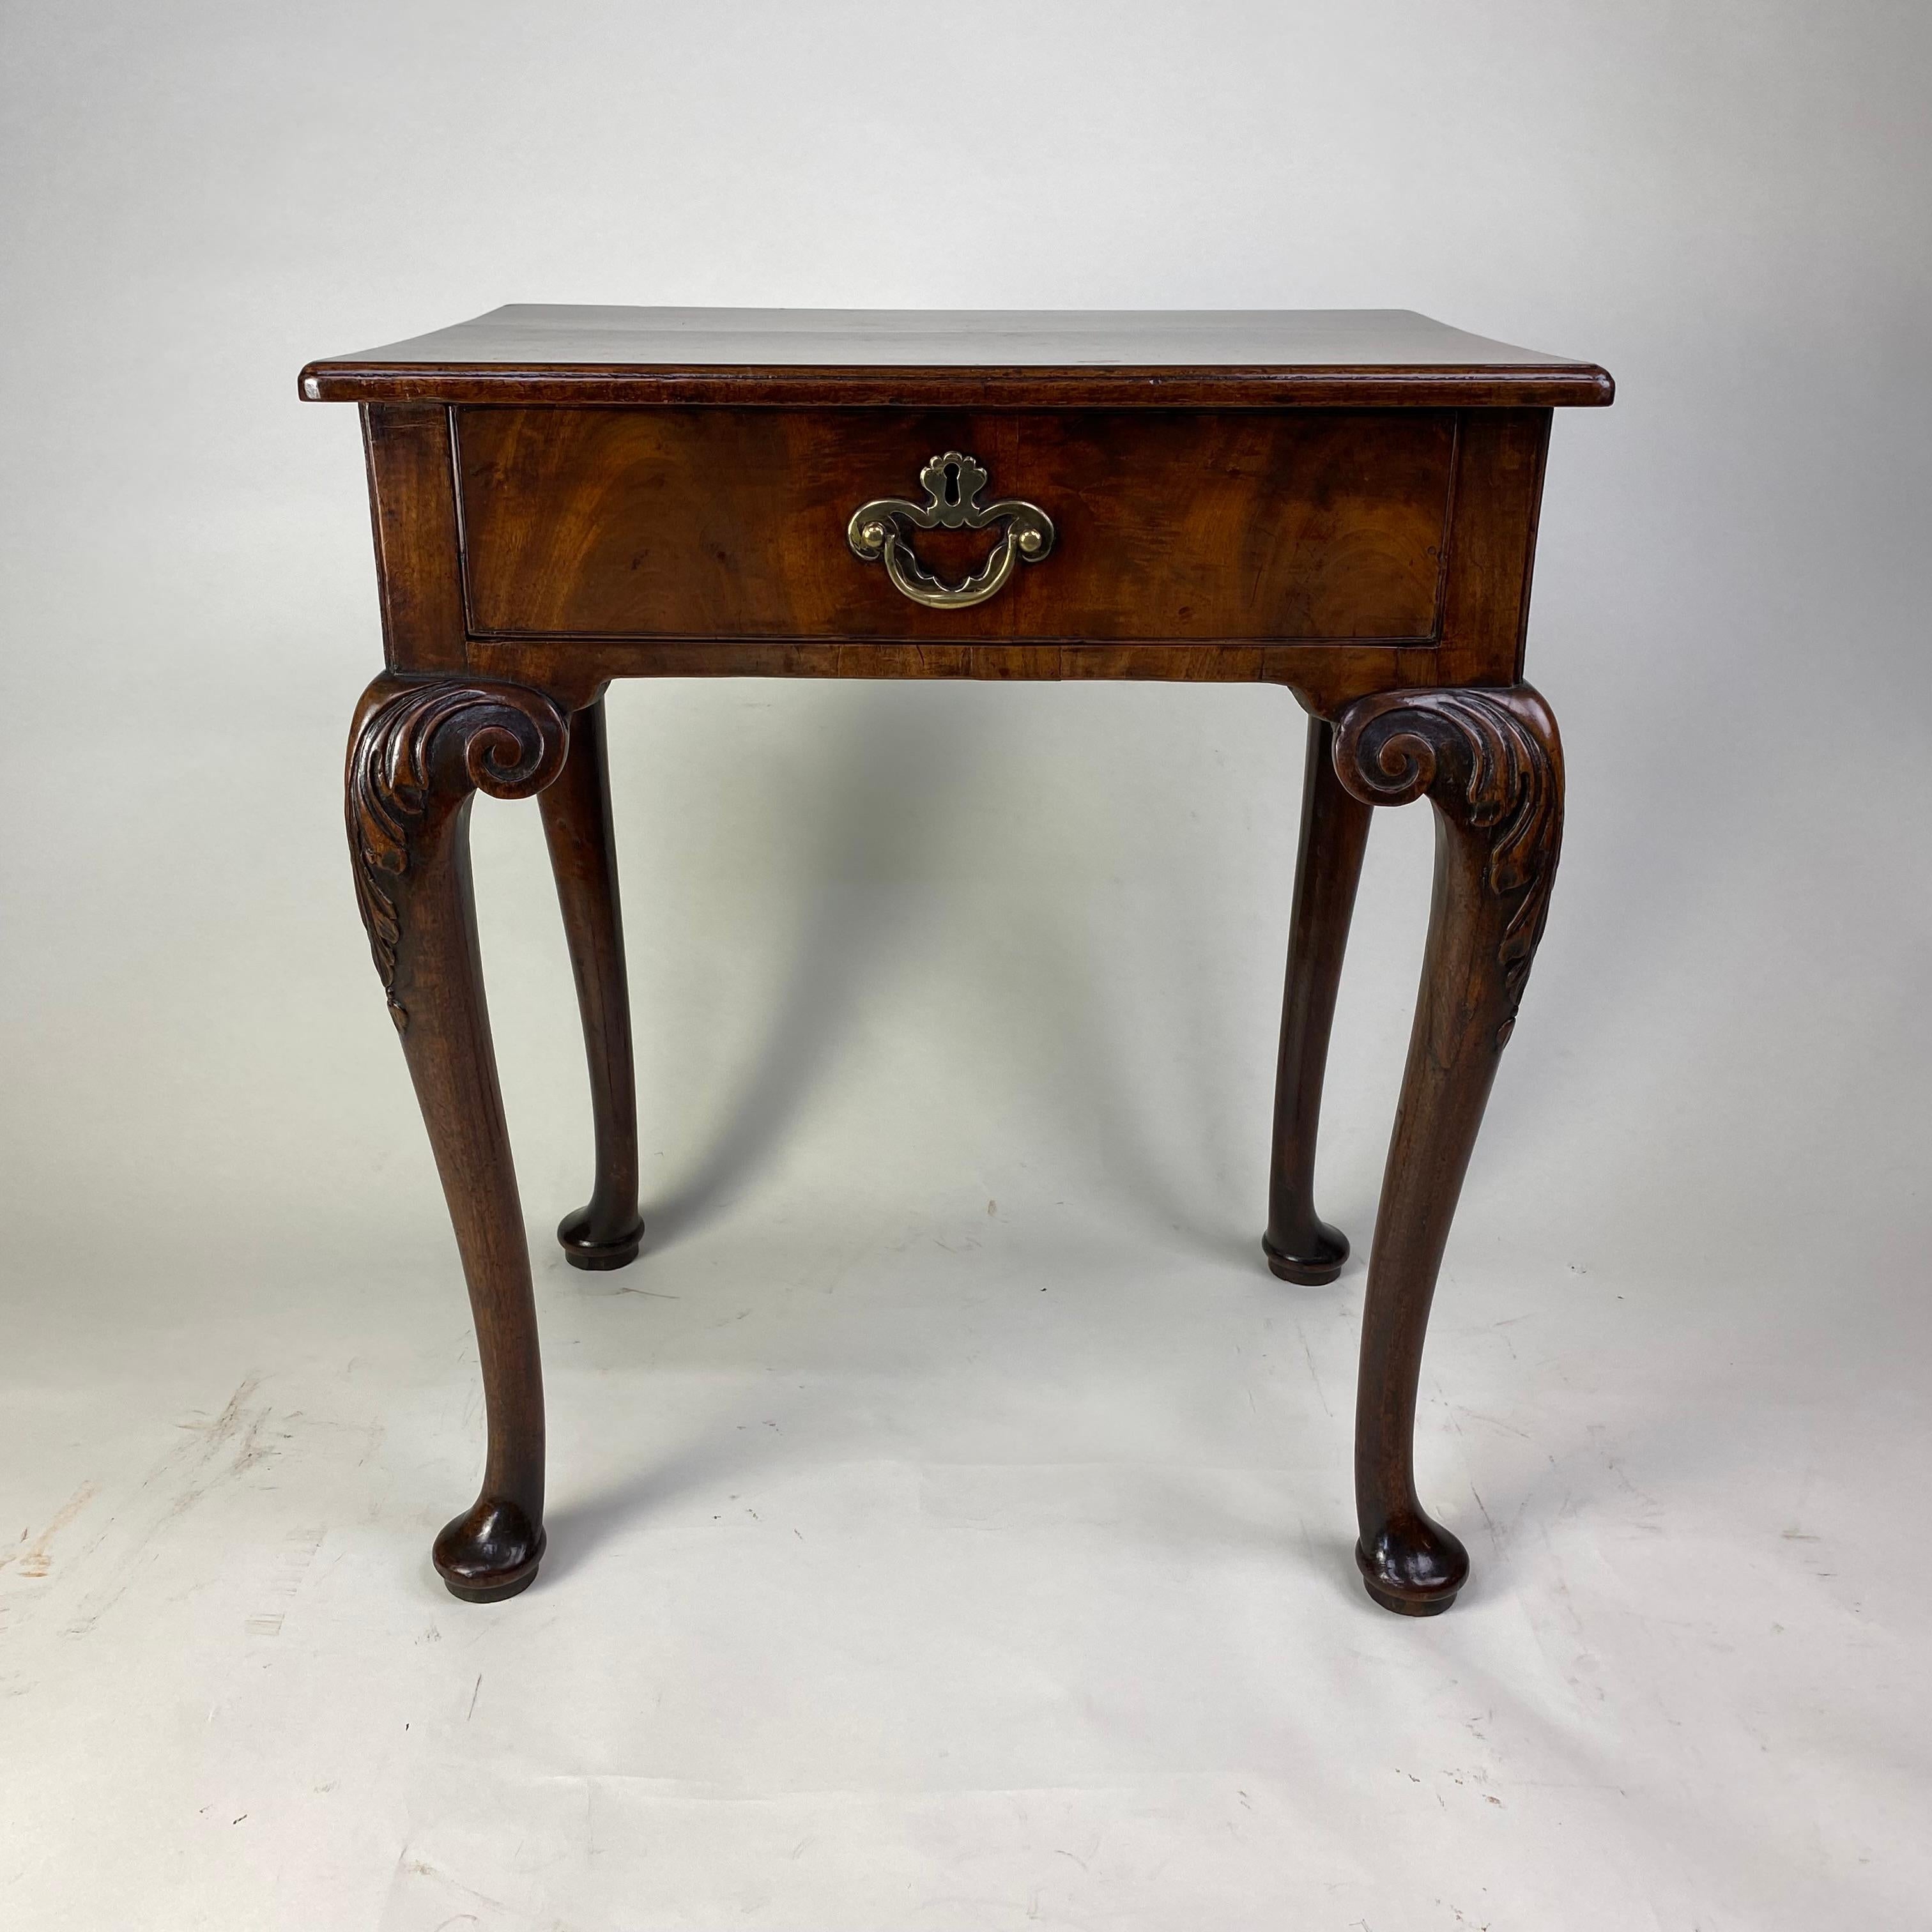 An exceptionally rare and special Geoge II period walnut side table of beautitul small proportions in 'untouched' original condition. This outstanding little side table is one of the prettiest and most desirable pieces of furniture I have ever owned